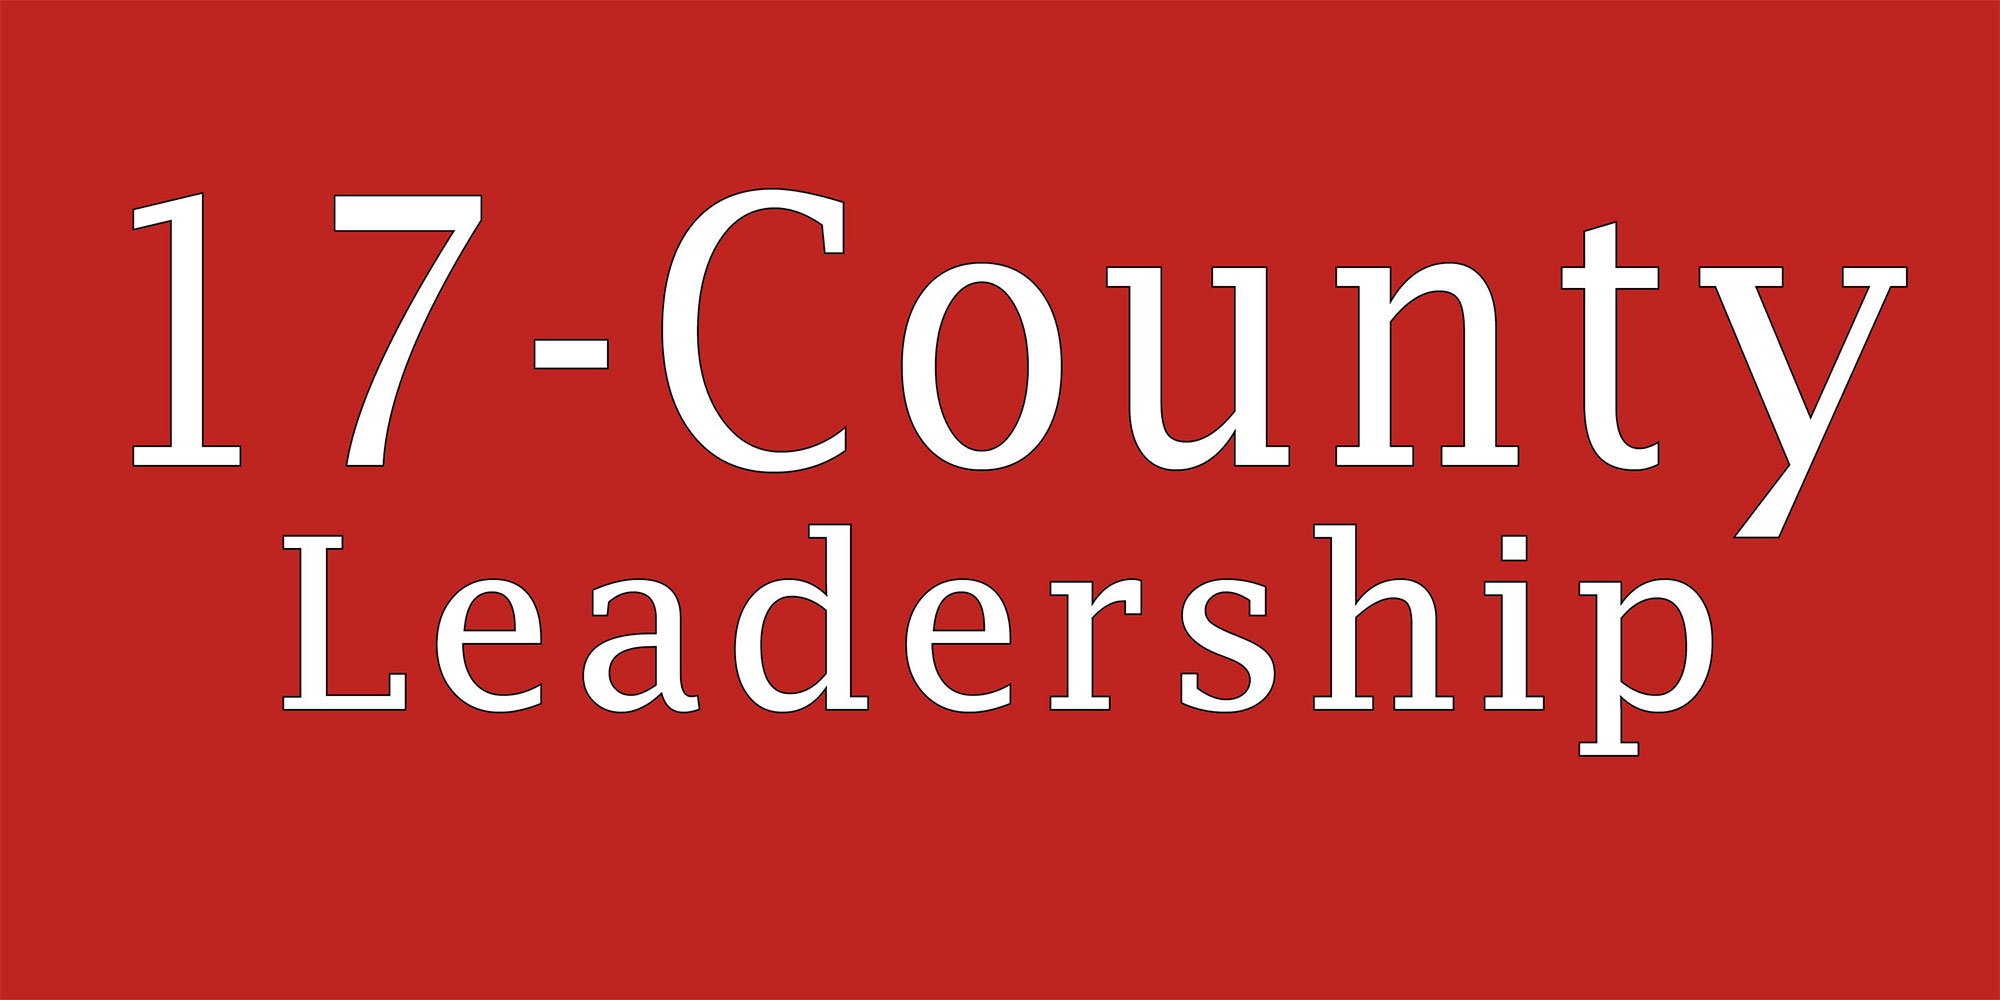 17-county leadership graphic